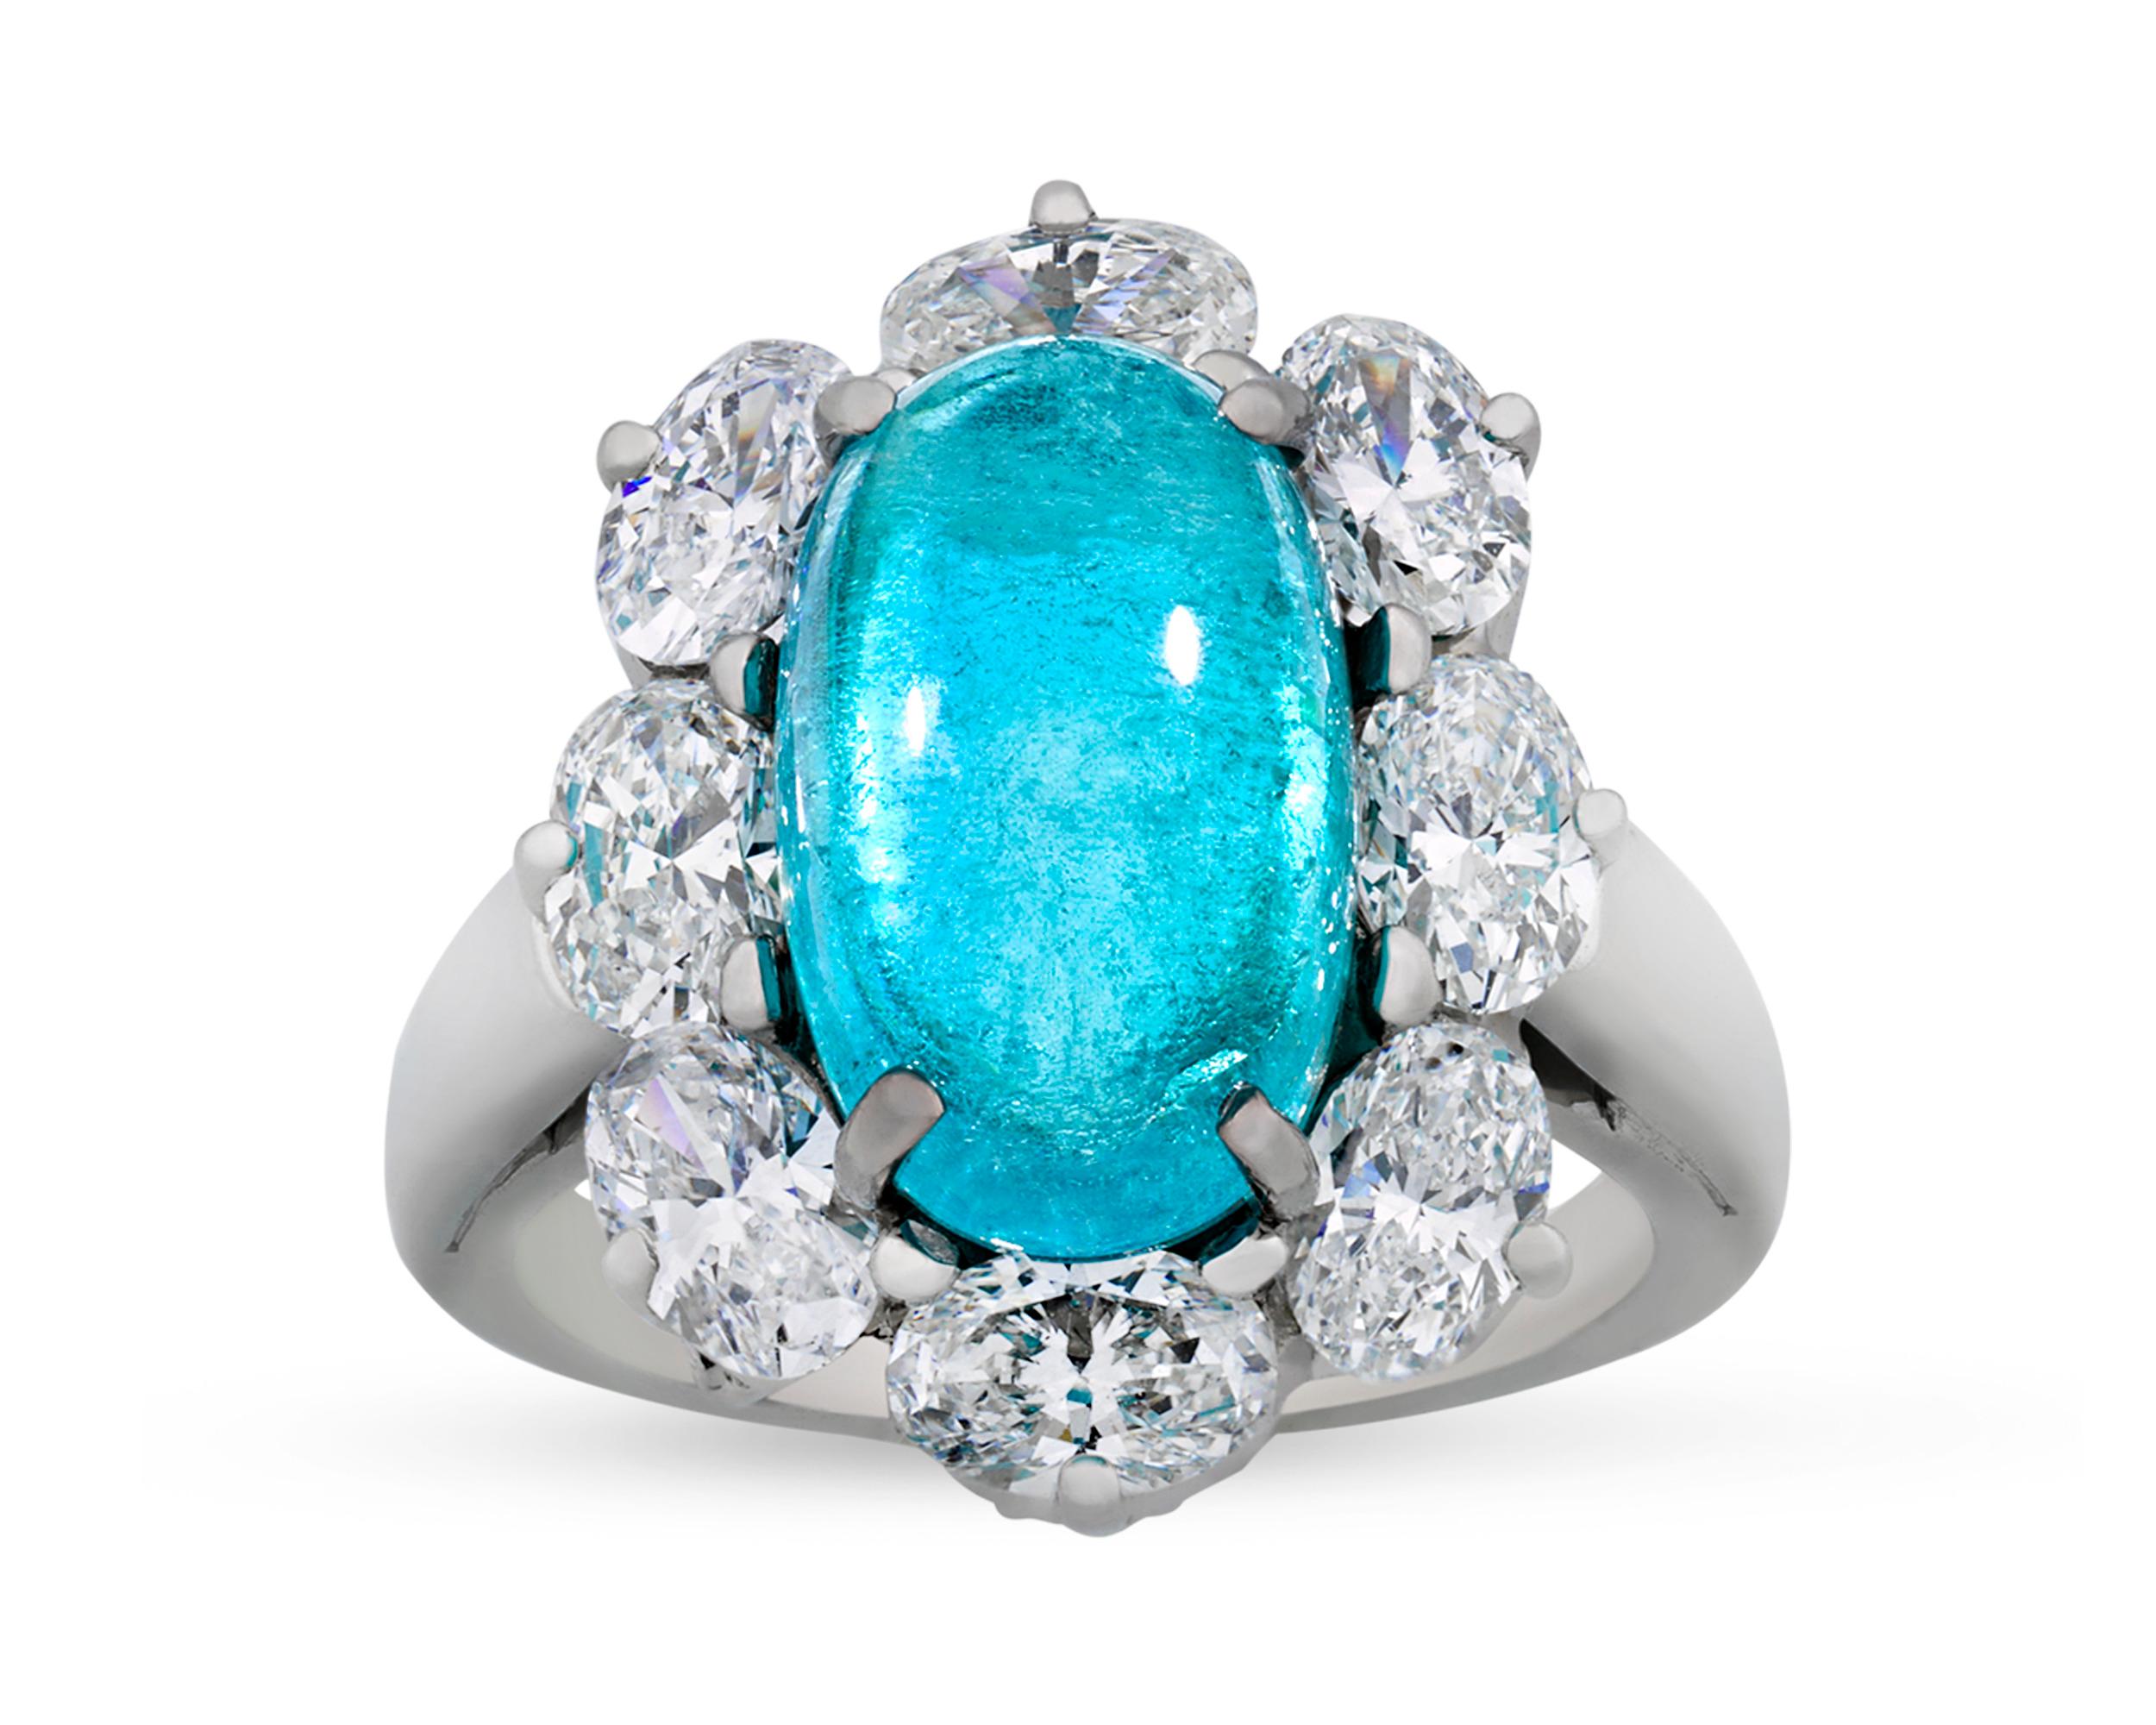 A 5.17-carat cabochon Paraiba tourmaline displays a remarkable intensity of color at the center of this ring by the celebrated Oscar Heyman. Its electric blue color is certified by the Gübelin Gemlab as being natural and Brazilian in origin. Set in